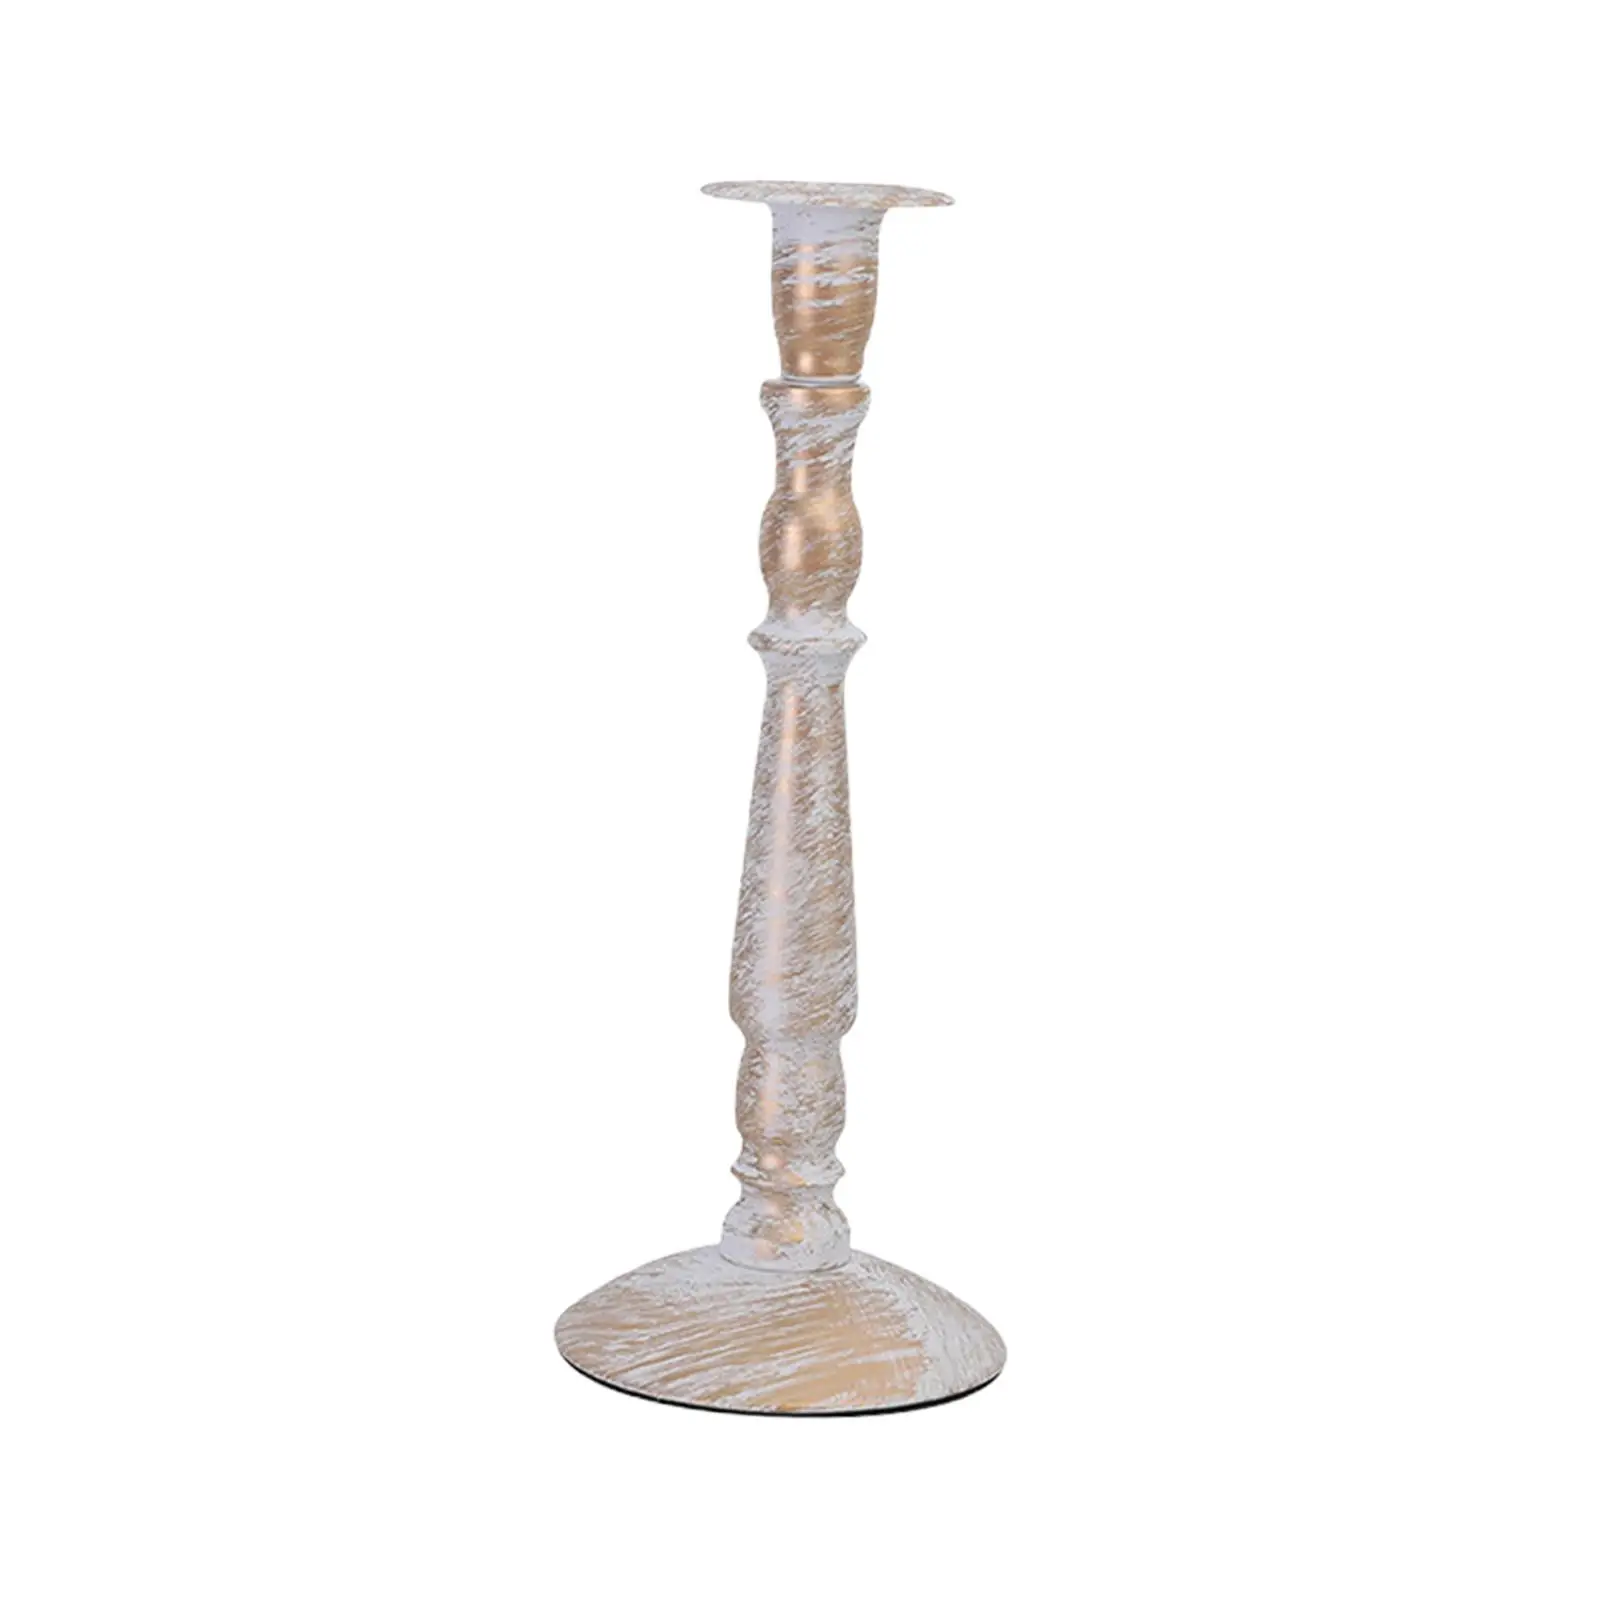 Golden Candlestick Holder Wedding Candle Stand Create Relaxing